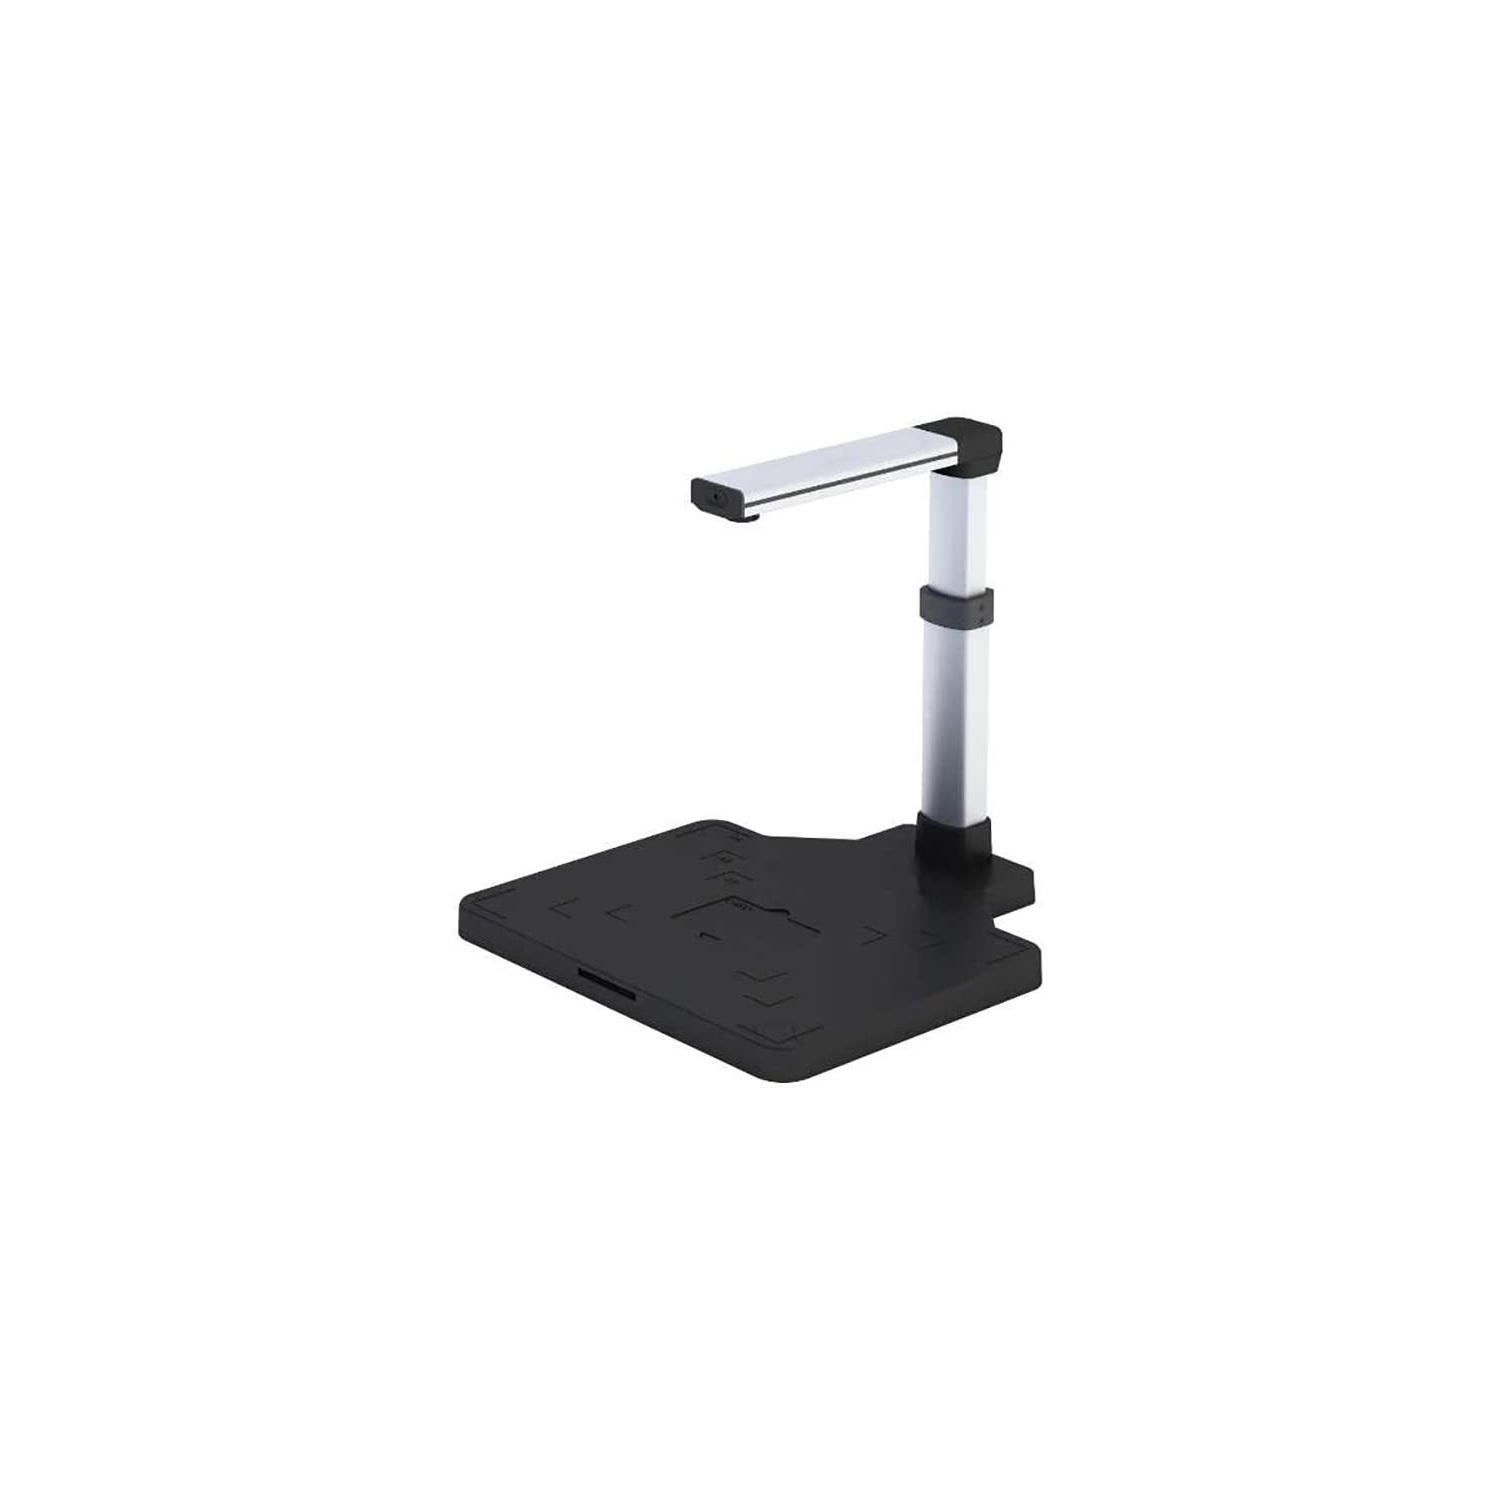 High Speed A3 Document Camera Photo Scanner Book Scanner with 8 Mega-pixel , LED Light for Teachers, Online Teaching, Computer(Only Work with Windows)